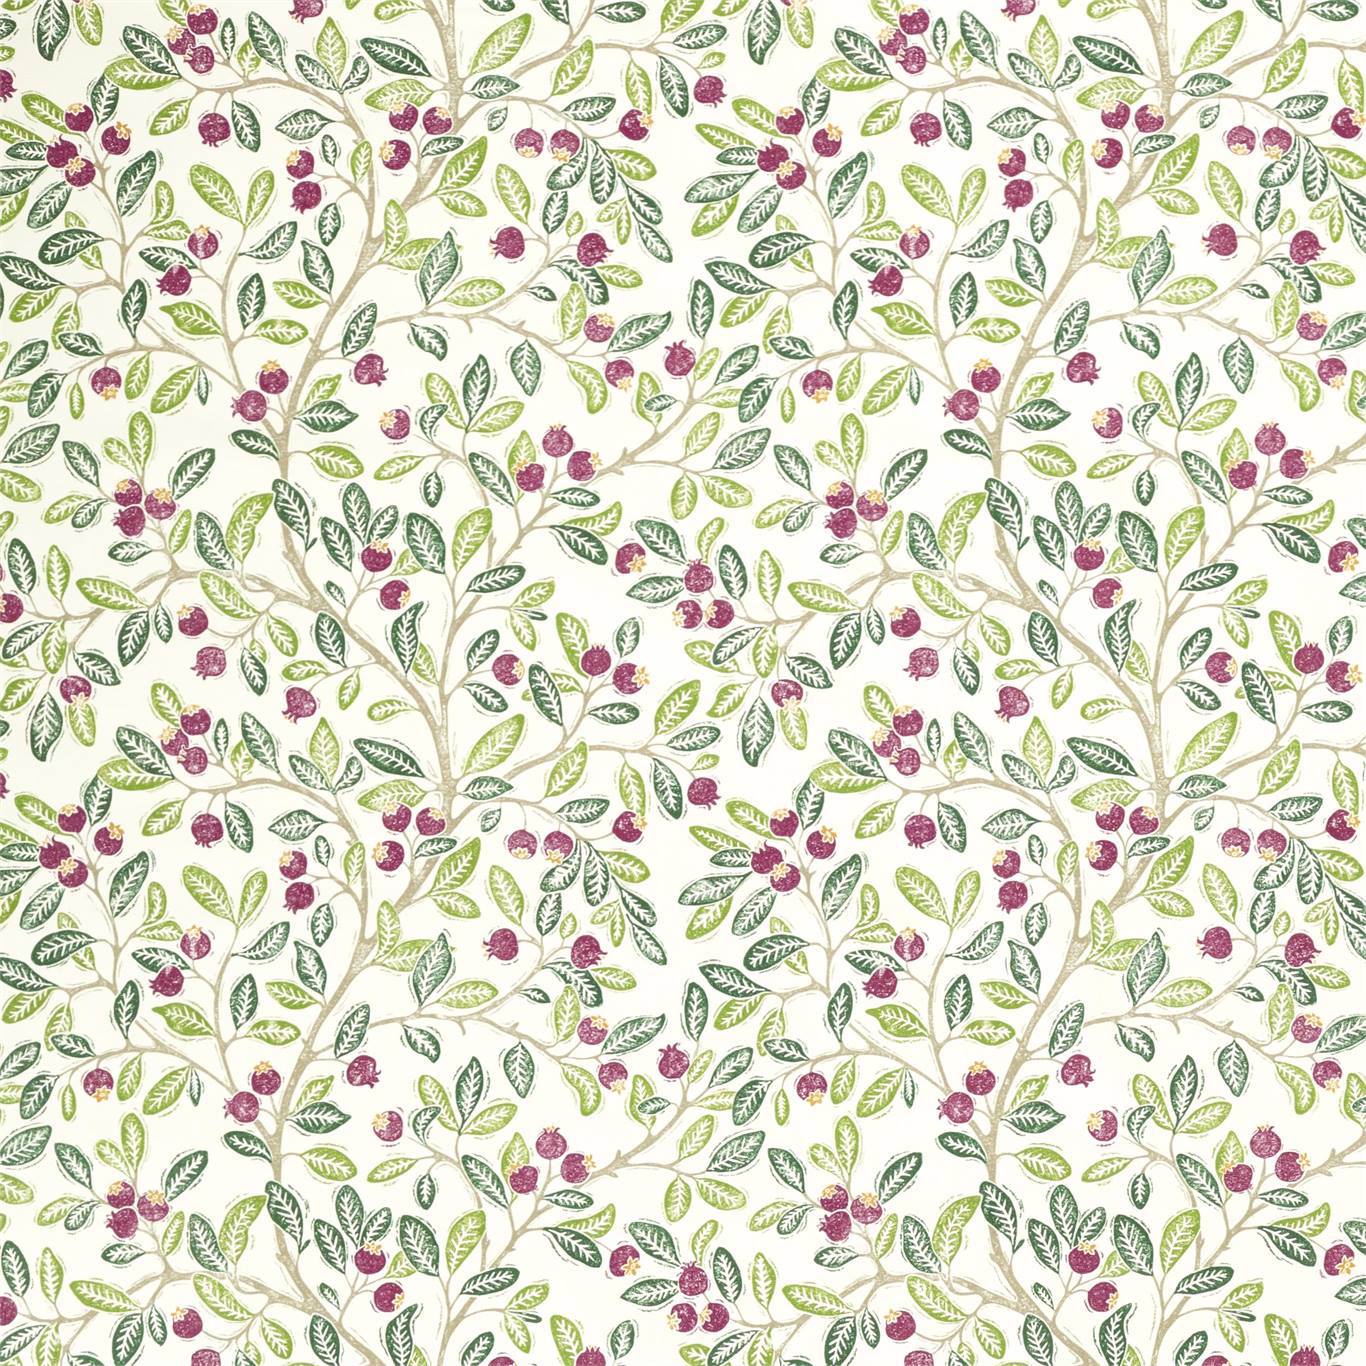 Wild Berries Fern/Mulberry Fabric by SAN